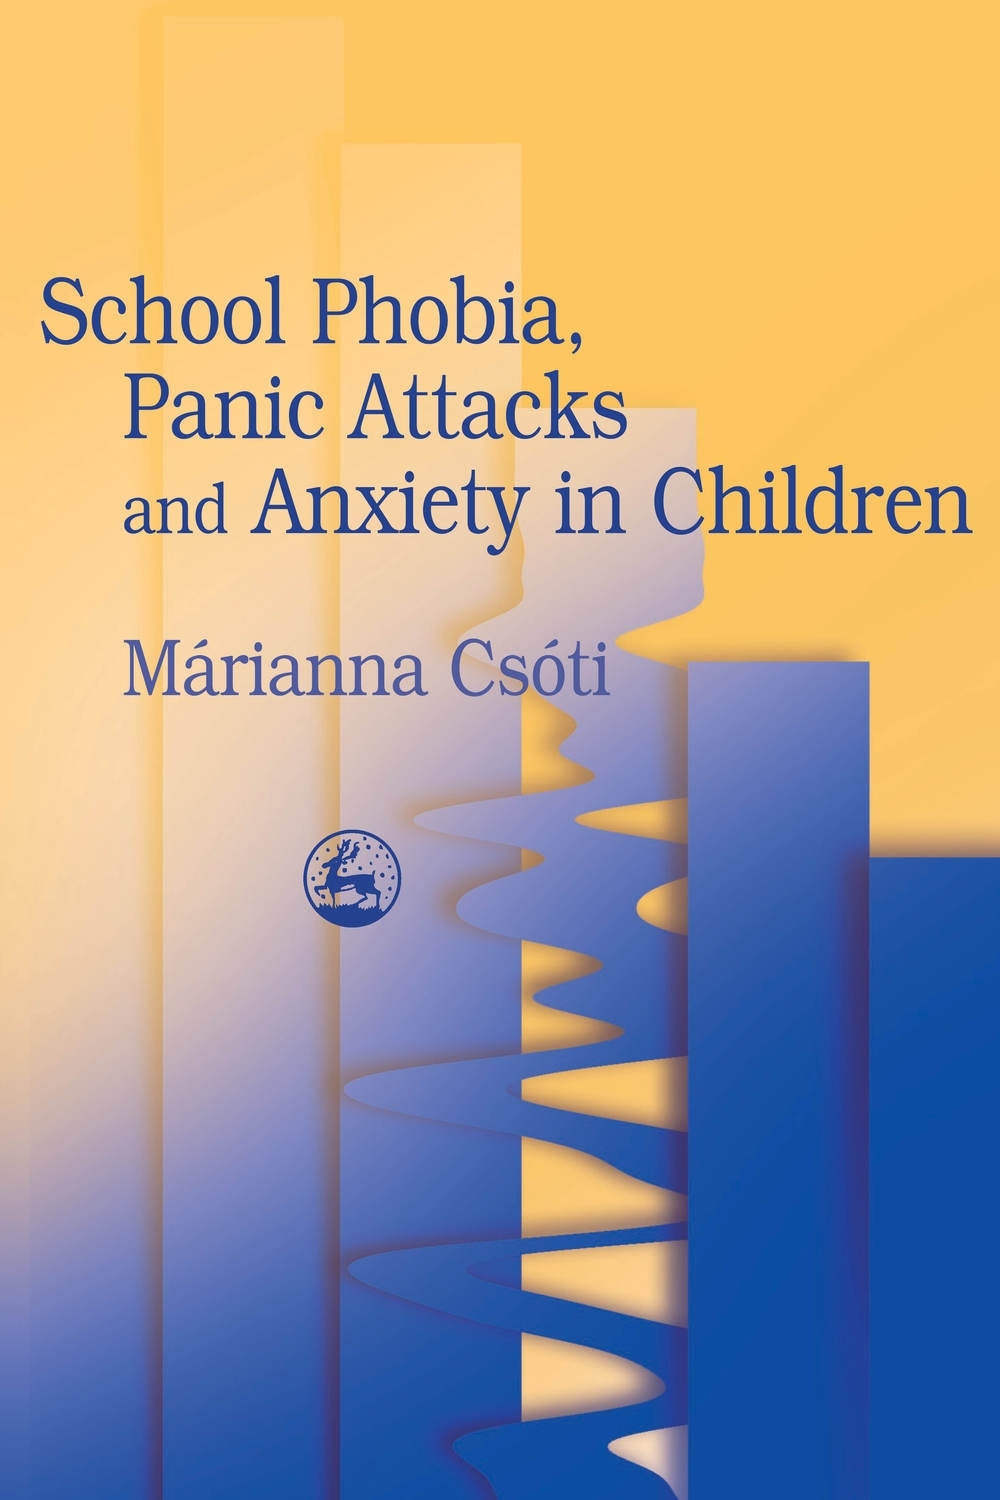 School Phobia, Panic Attacks and Anxiety in Children by Marianna Csoti